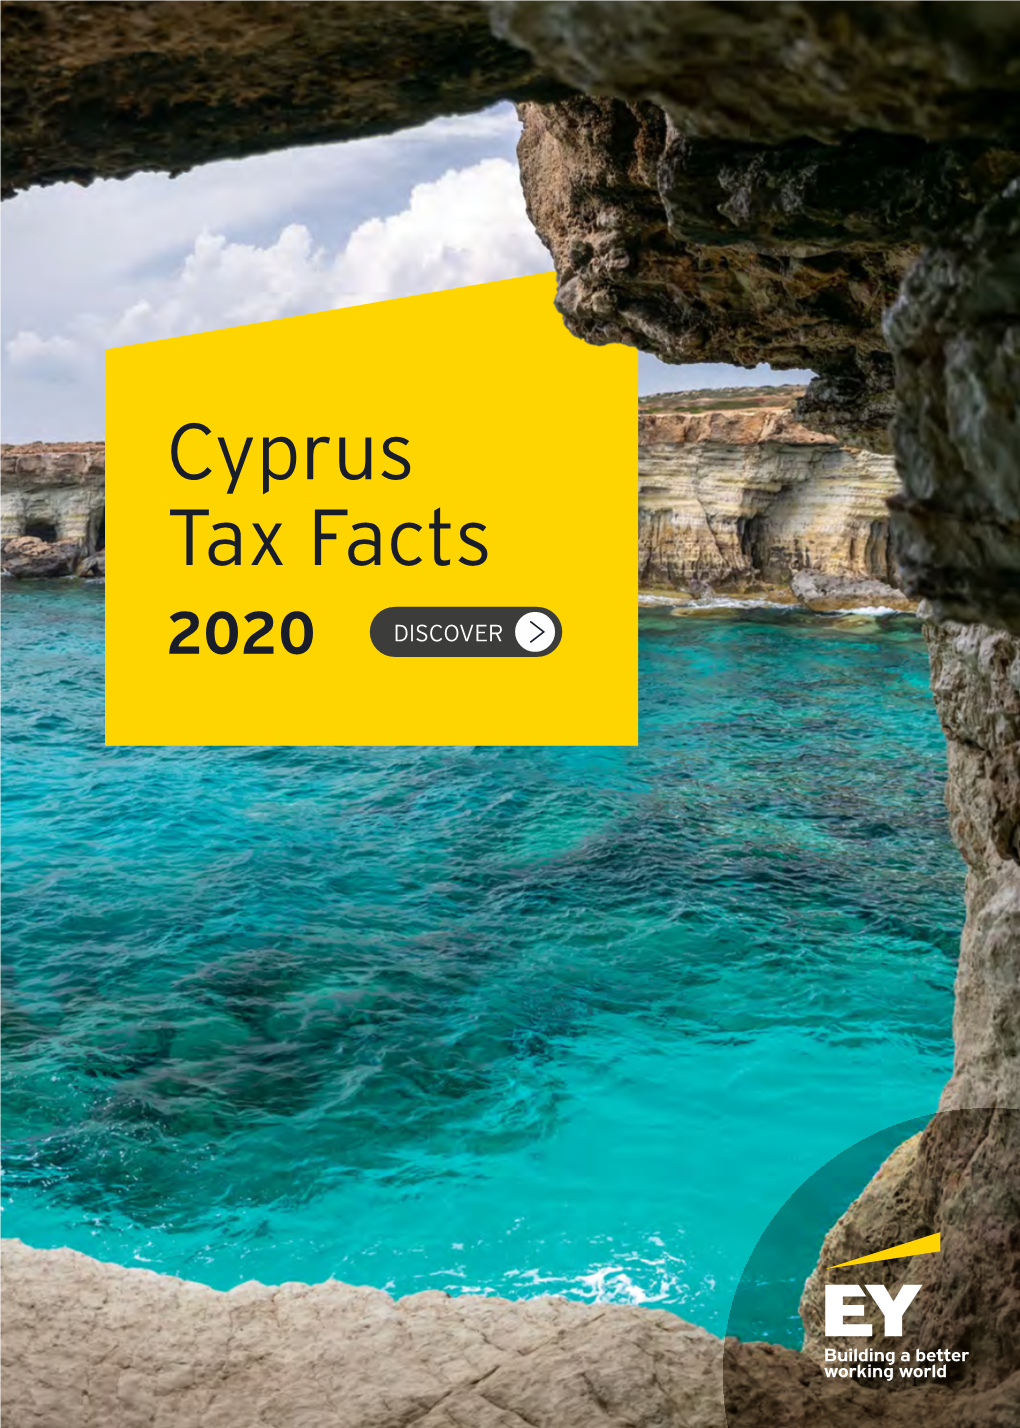 Cyprus Tax Facts 2020 DISCOVER